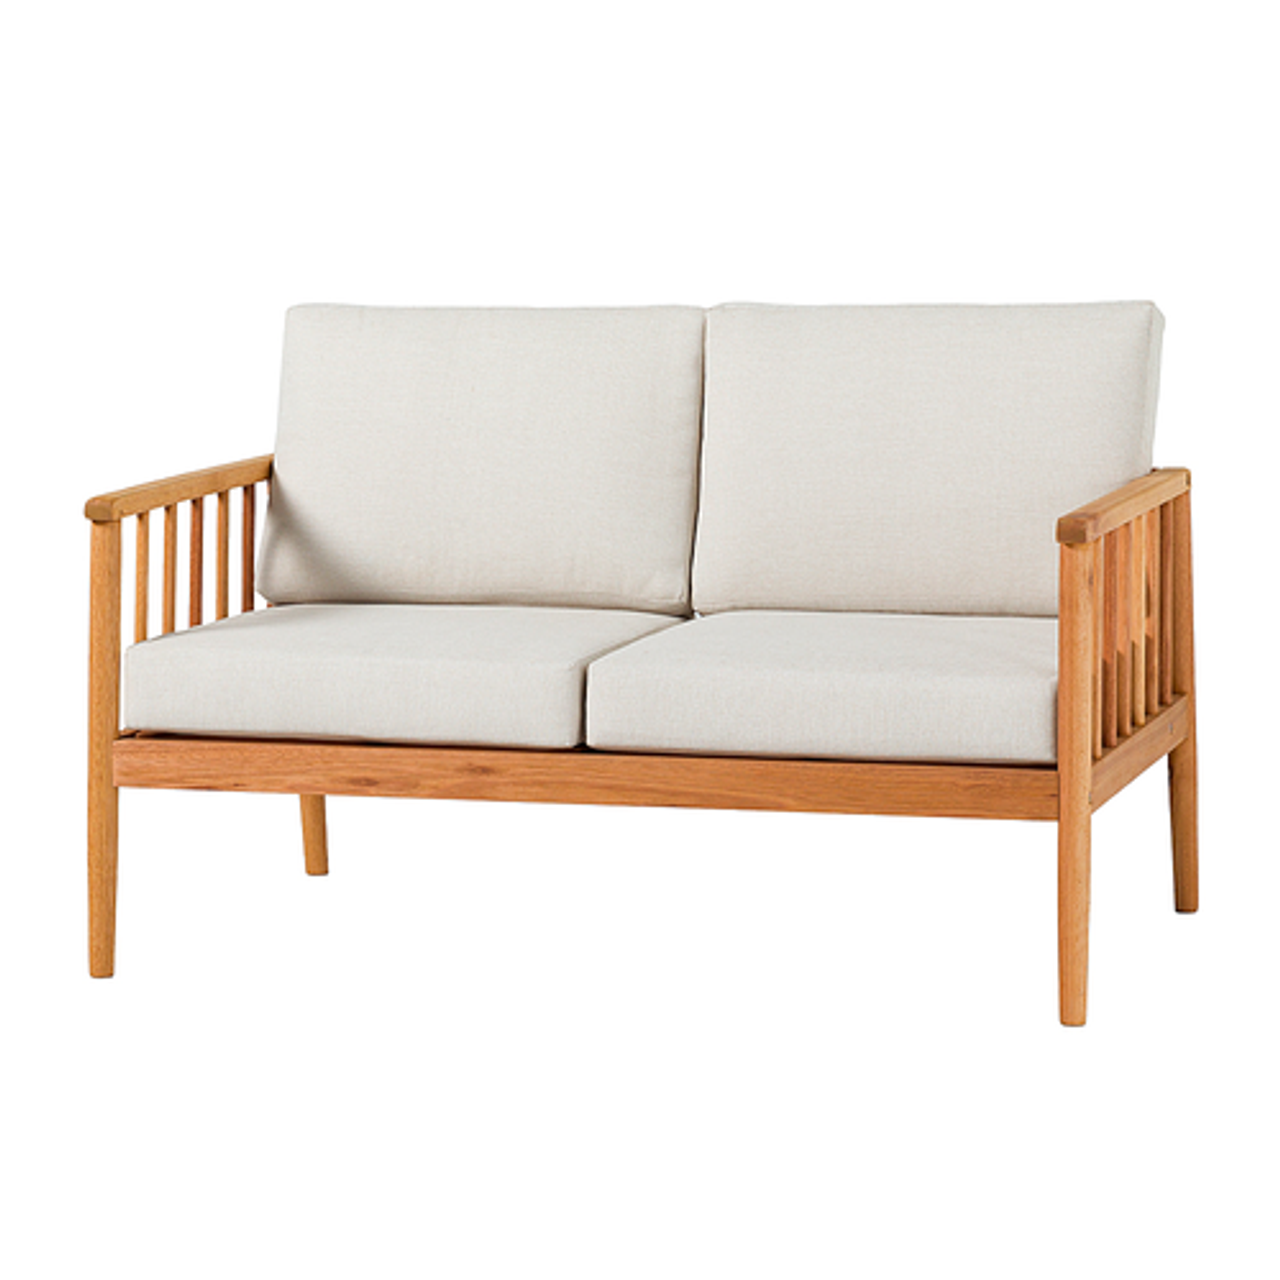 Walker Edison - Modern Solid Wood Spindle-Style Outdoor Loveseat - Natural